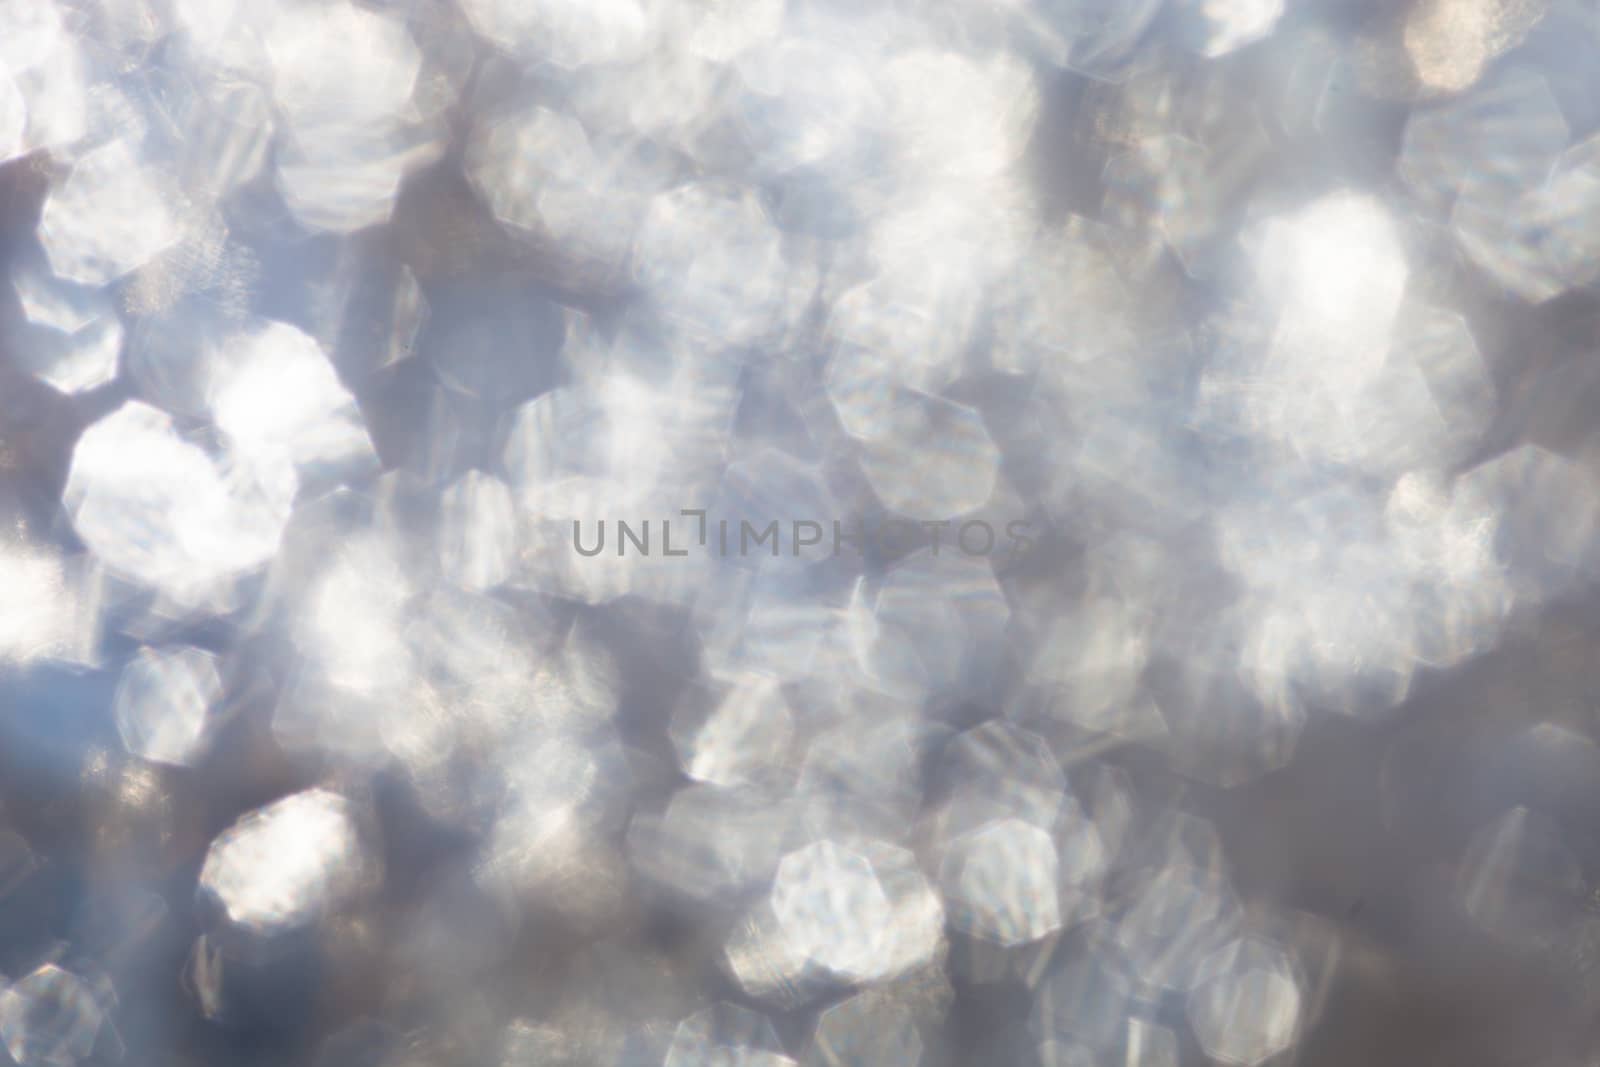 Blurred surface of the polythene in the sunshine.